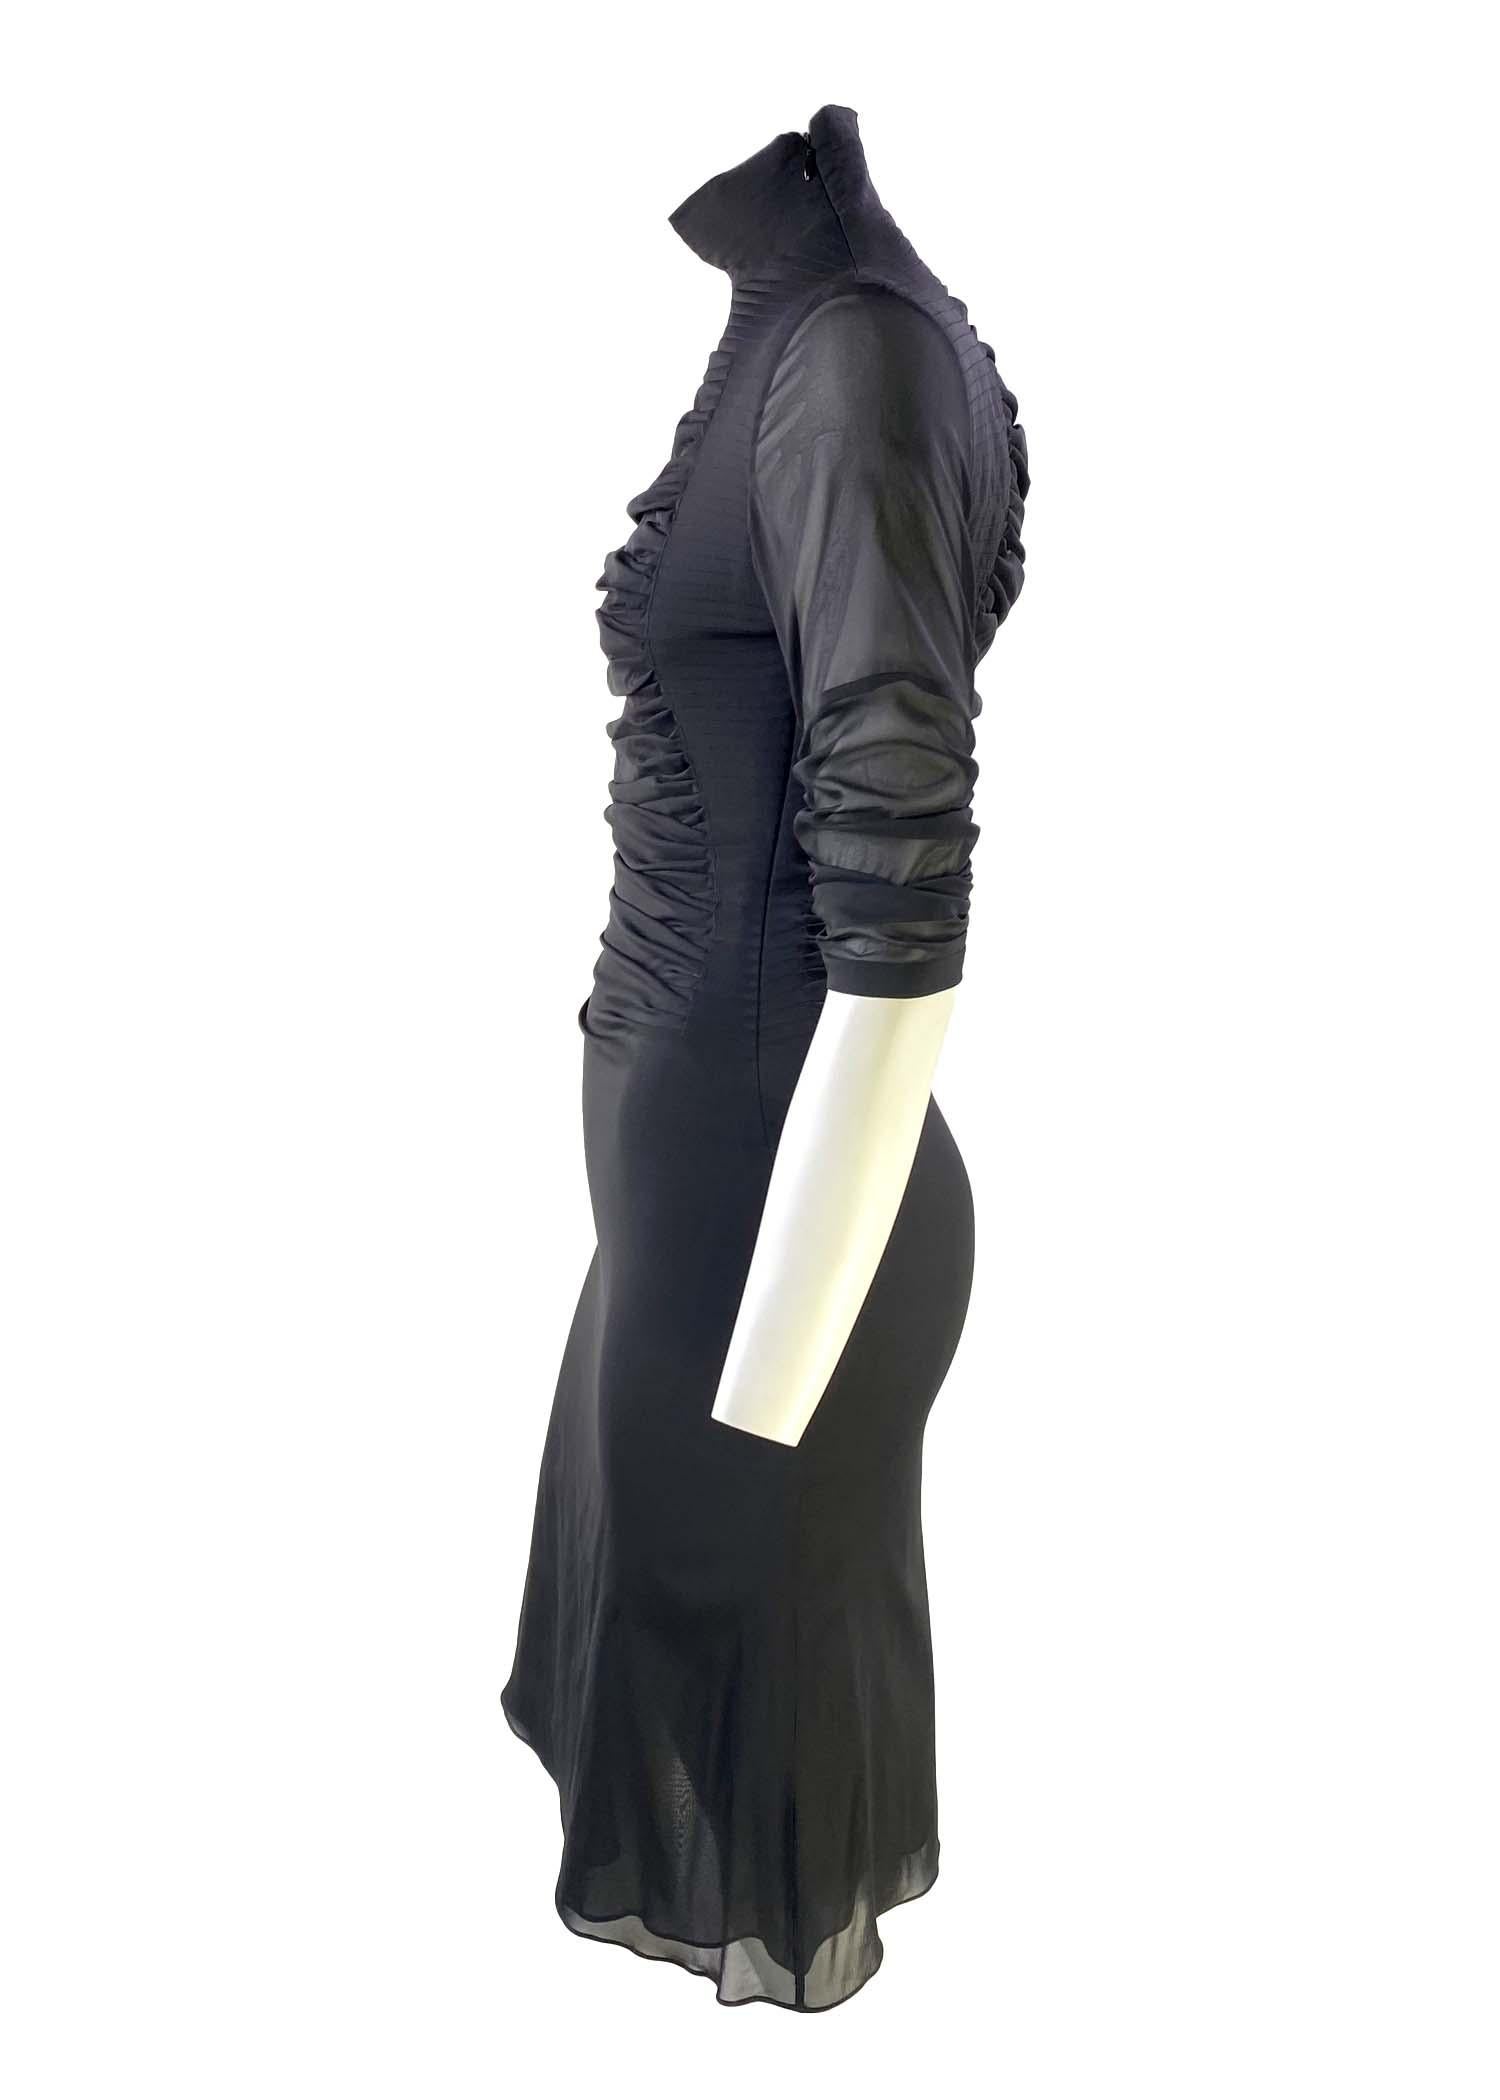 S/S 2001 Yves Saint Laurent by Tom Ford Black Pleated Silk Runway Dress For Sale 1